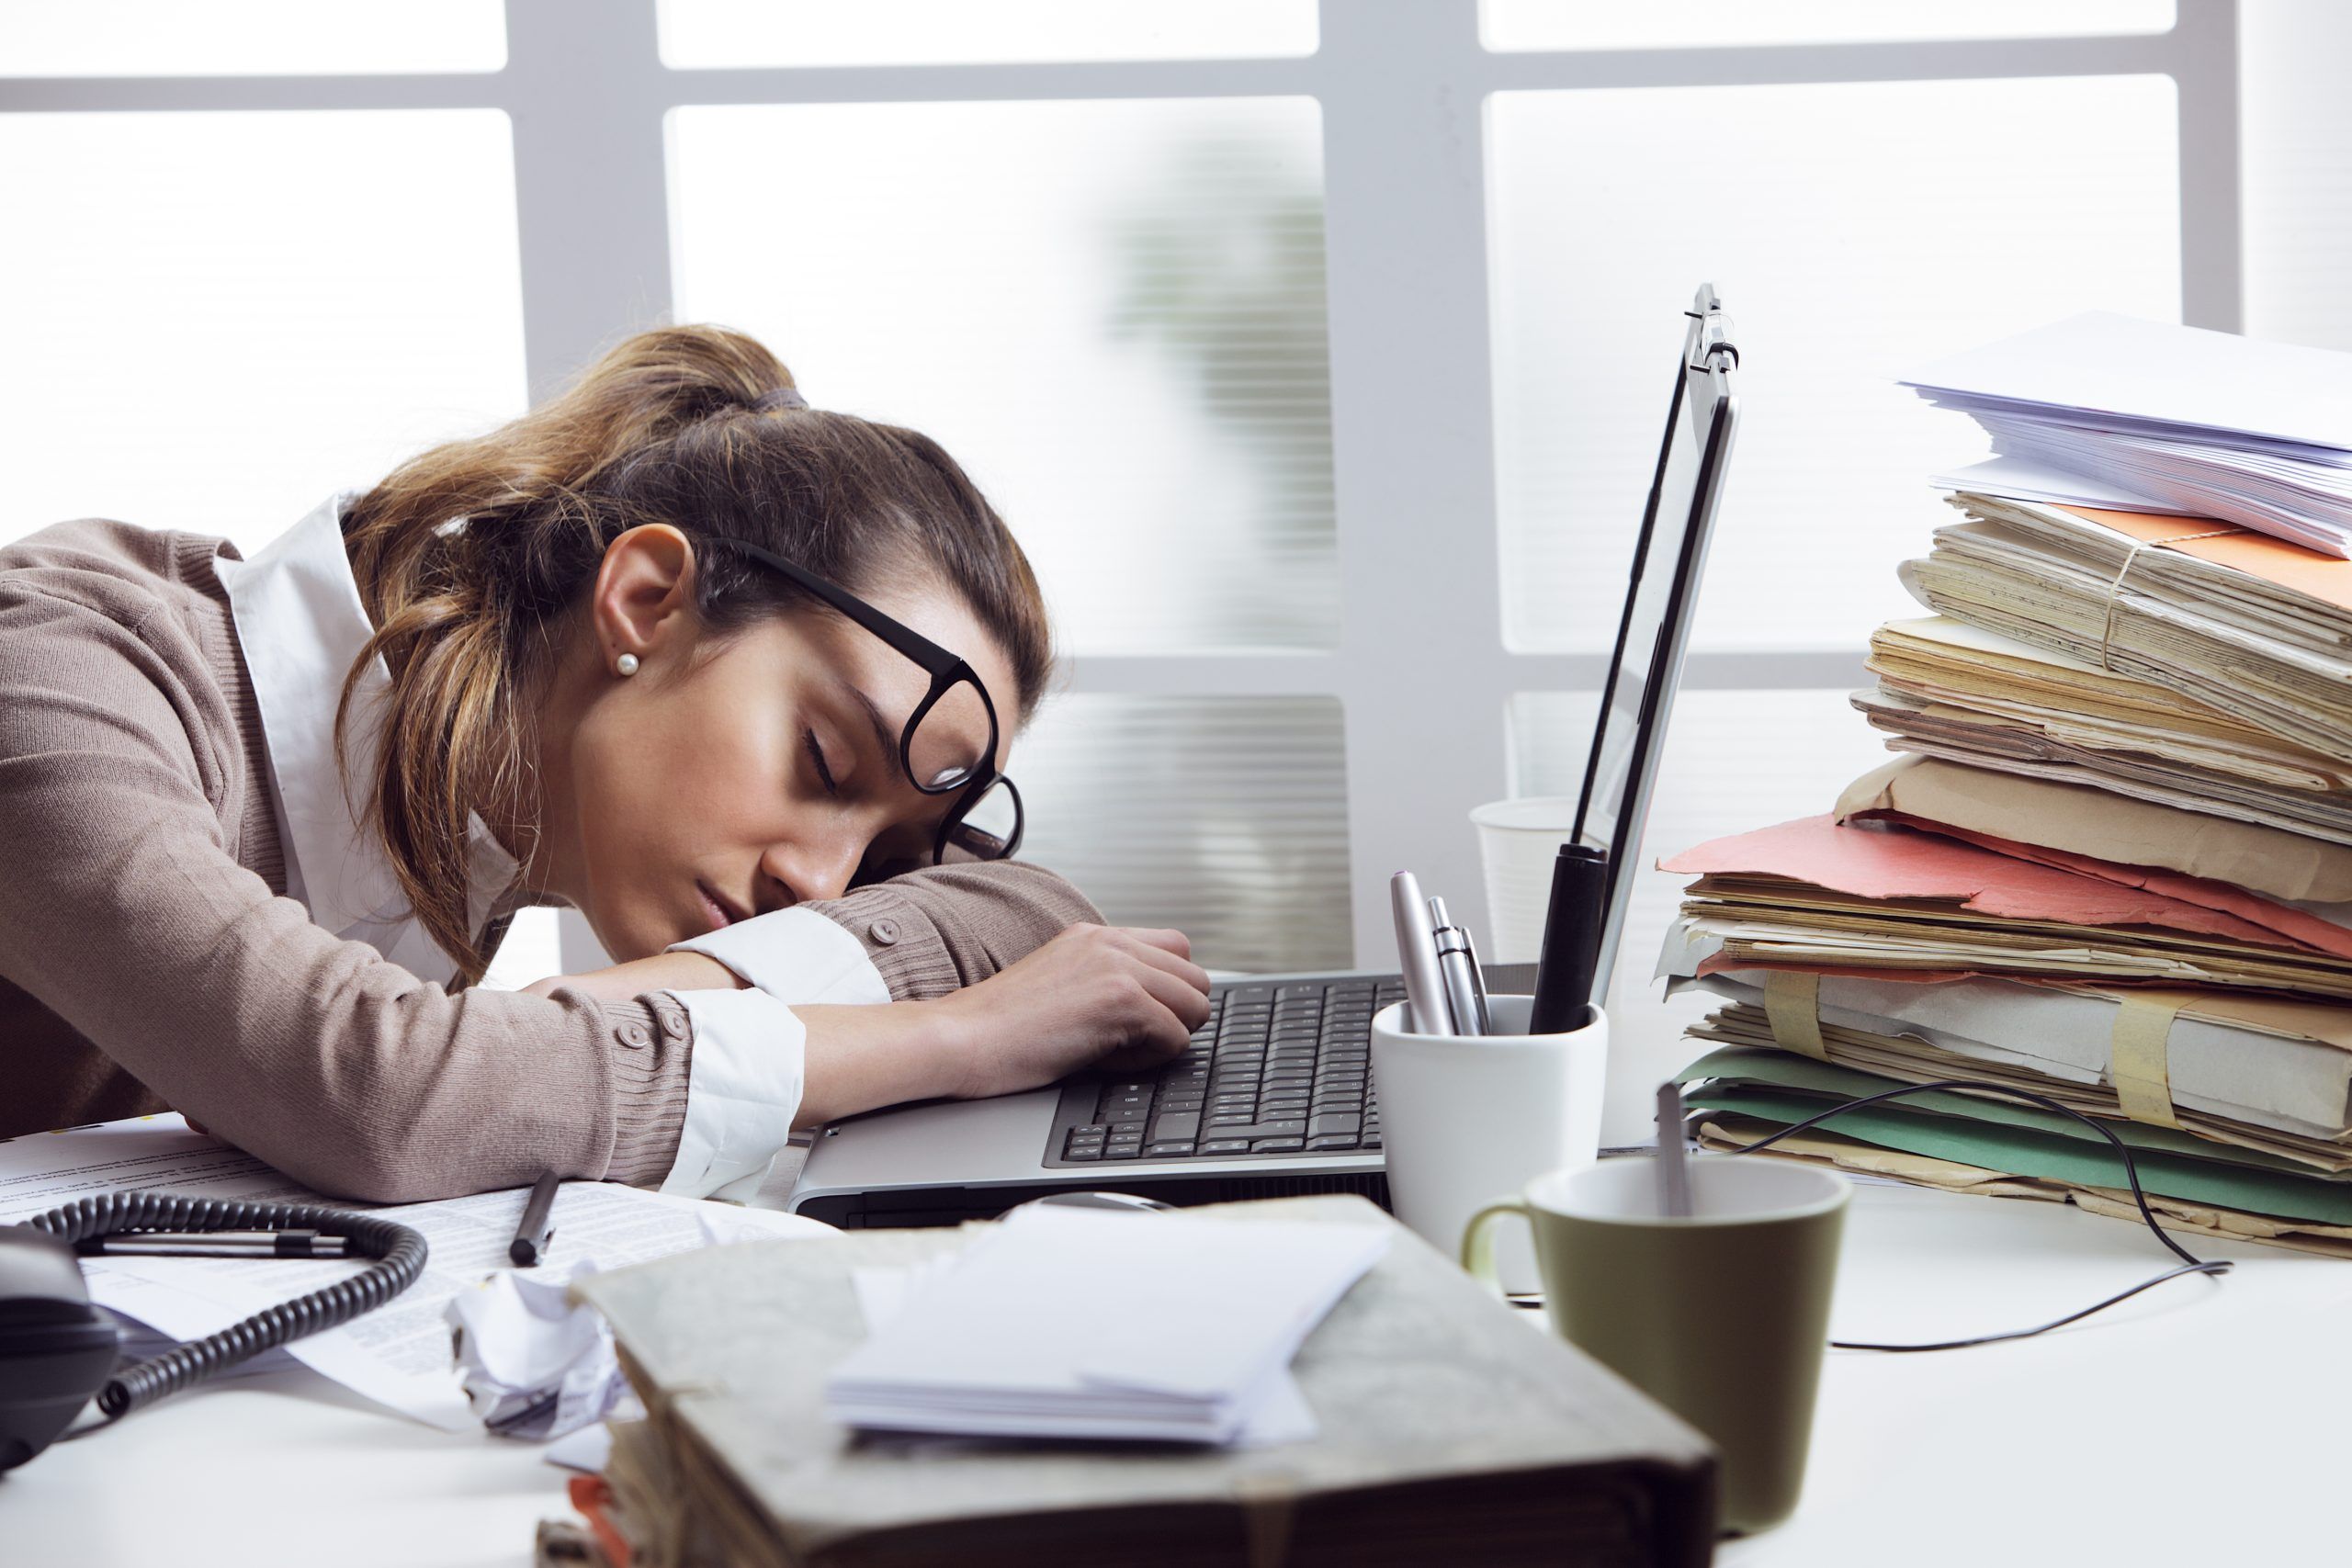 Feeling That Afternoon Slump at Work? Air Quality Could be to Blame